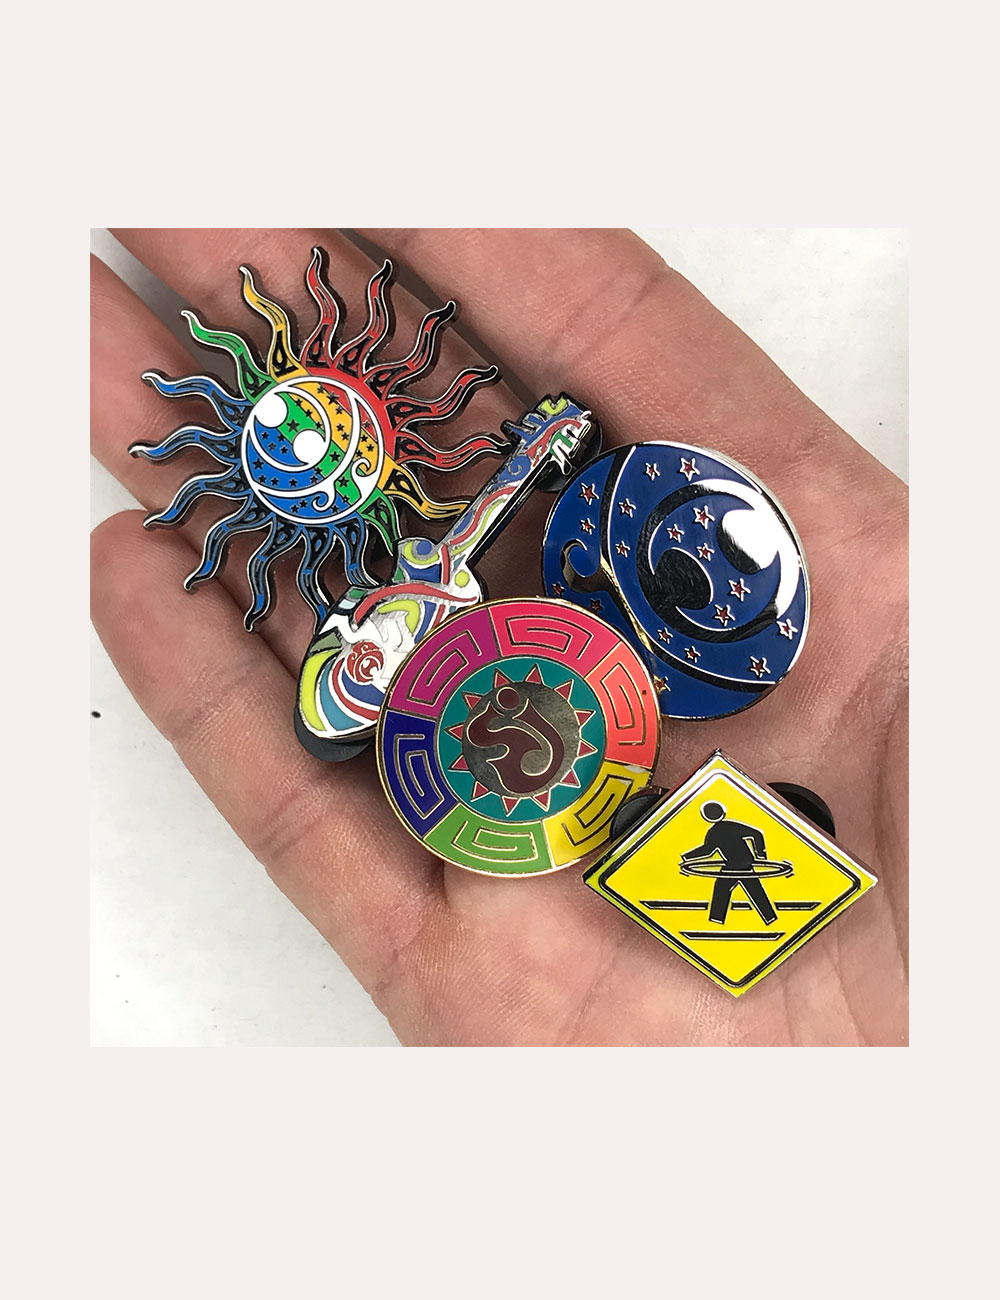 The String Cheese Incident - Merch - Pins - Pin Set